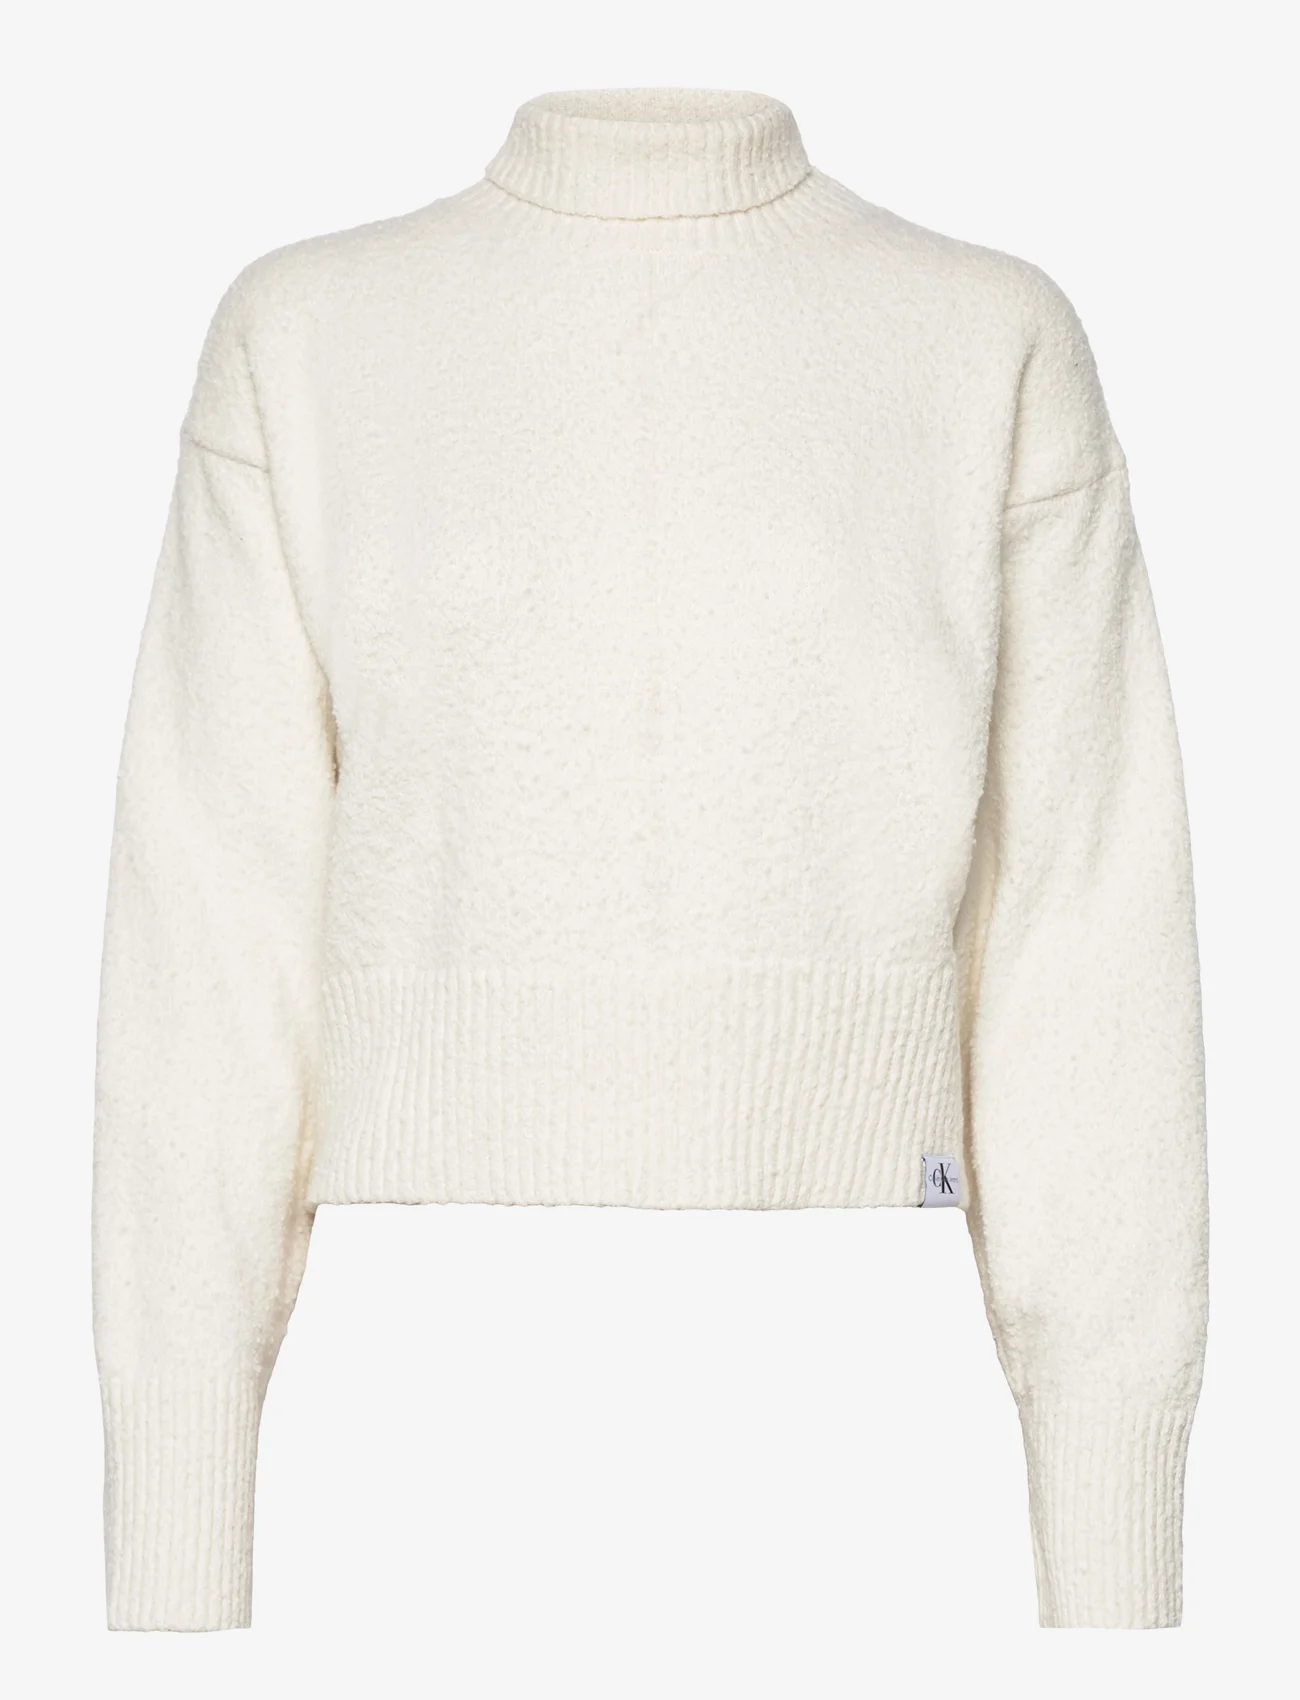 Calvin Klein Jeans - BOUCLE HIGH NECK SWEATER - sweaters - ivory - 0